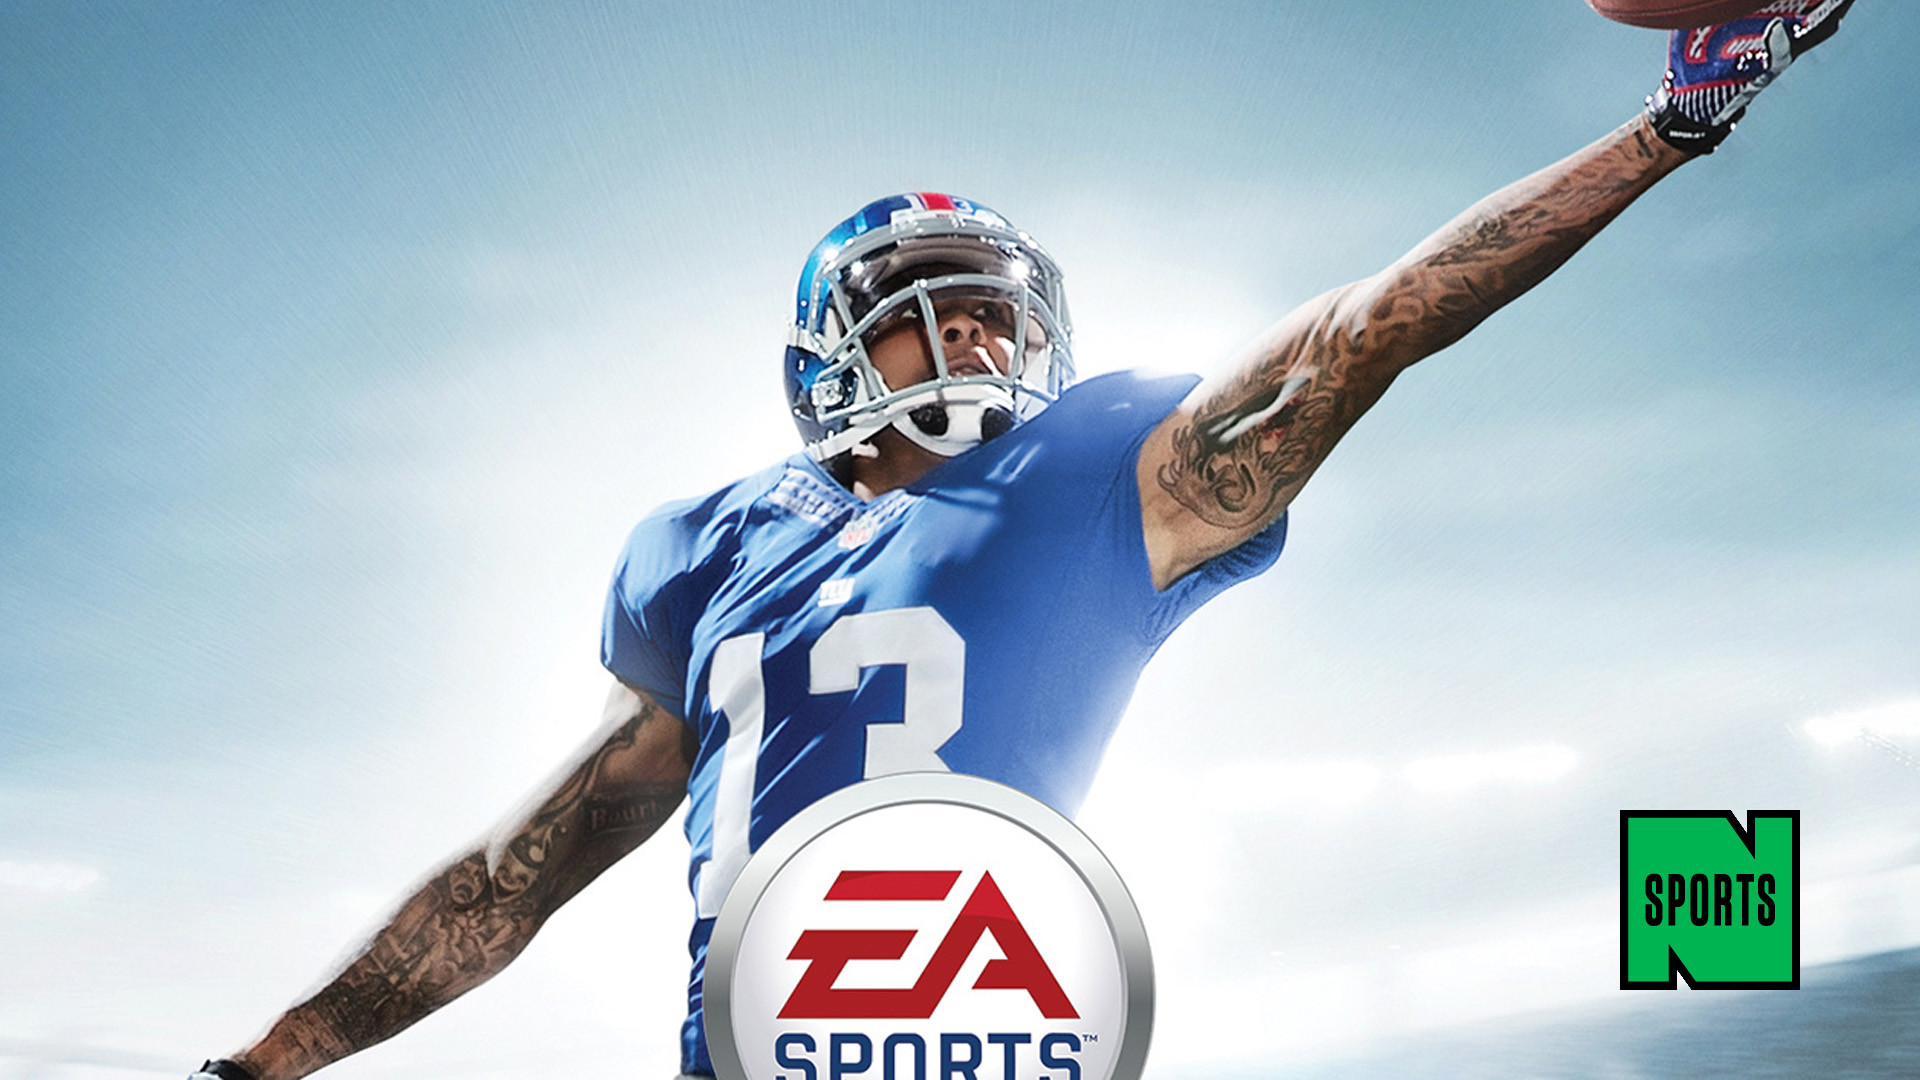 1920x1080 Odell Beckham Jr. on "Madden 16," His Breakout Rookie Year, and "The Catch"  Time: 04:28